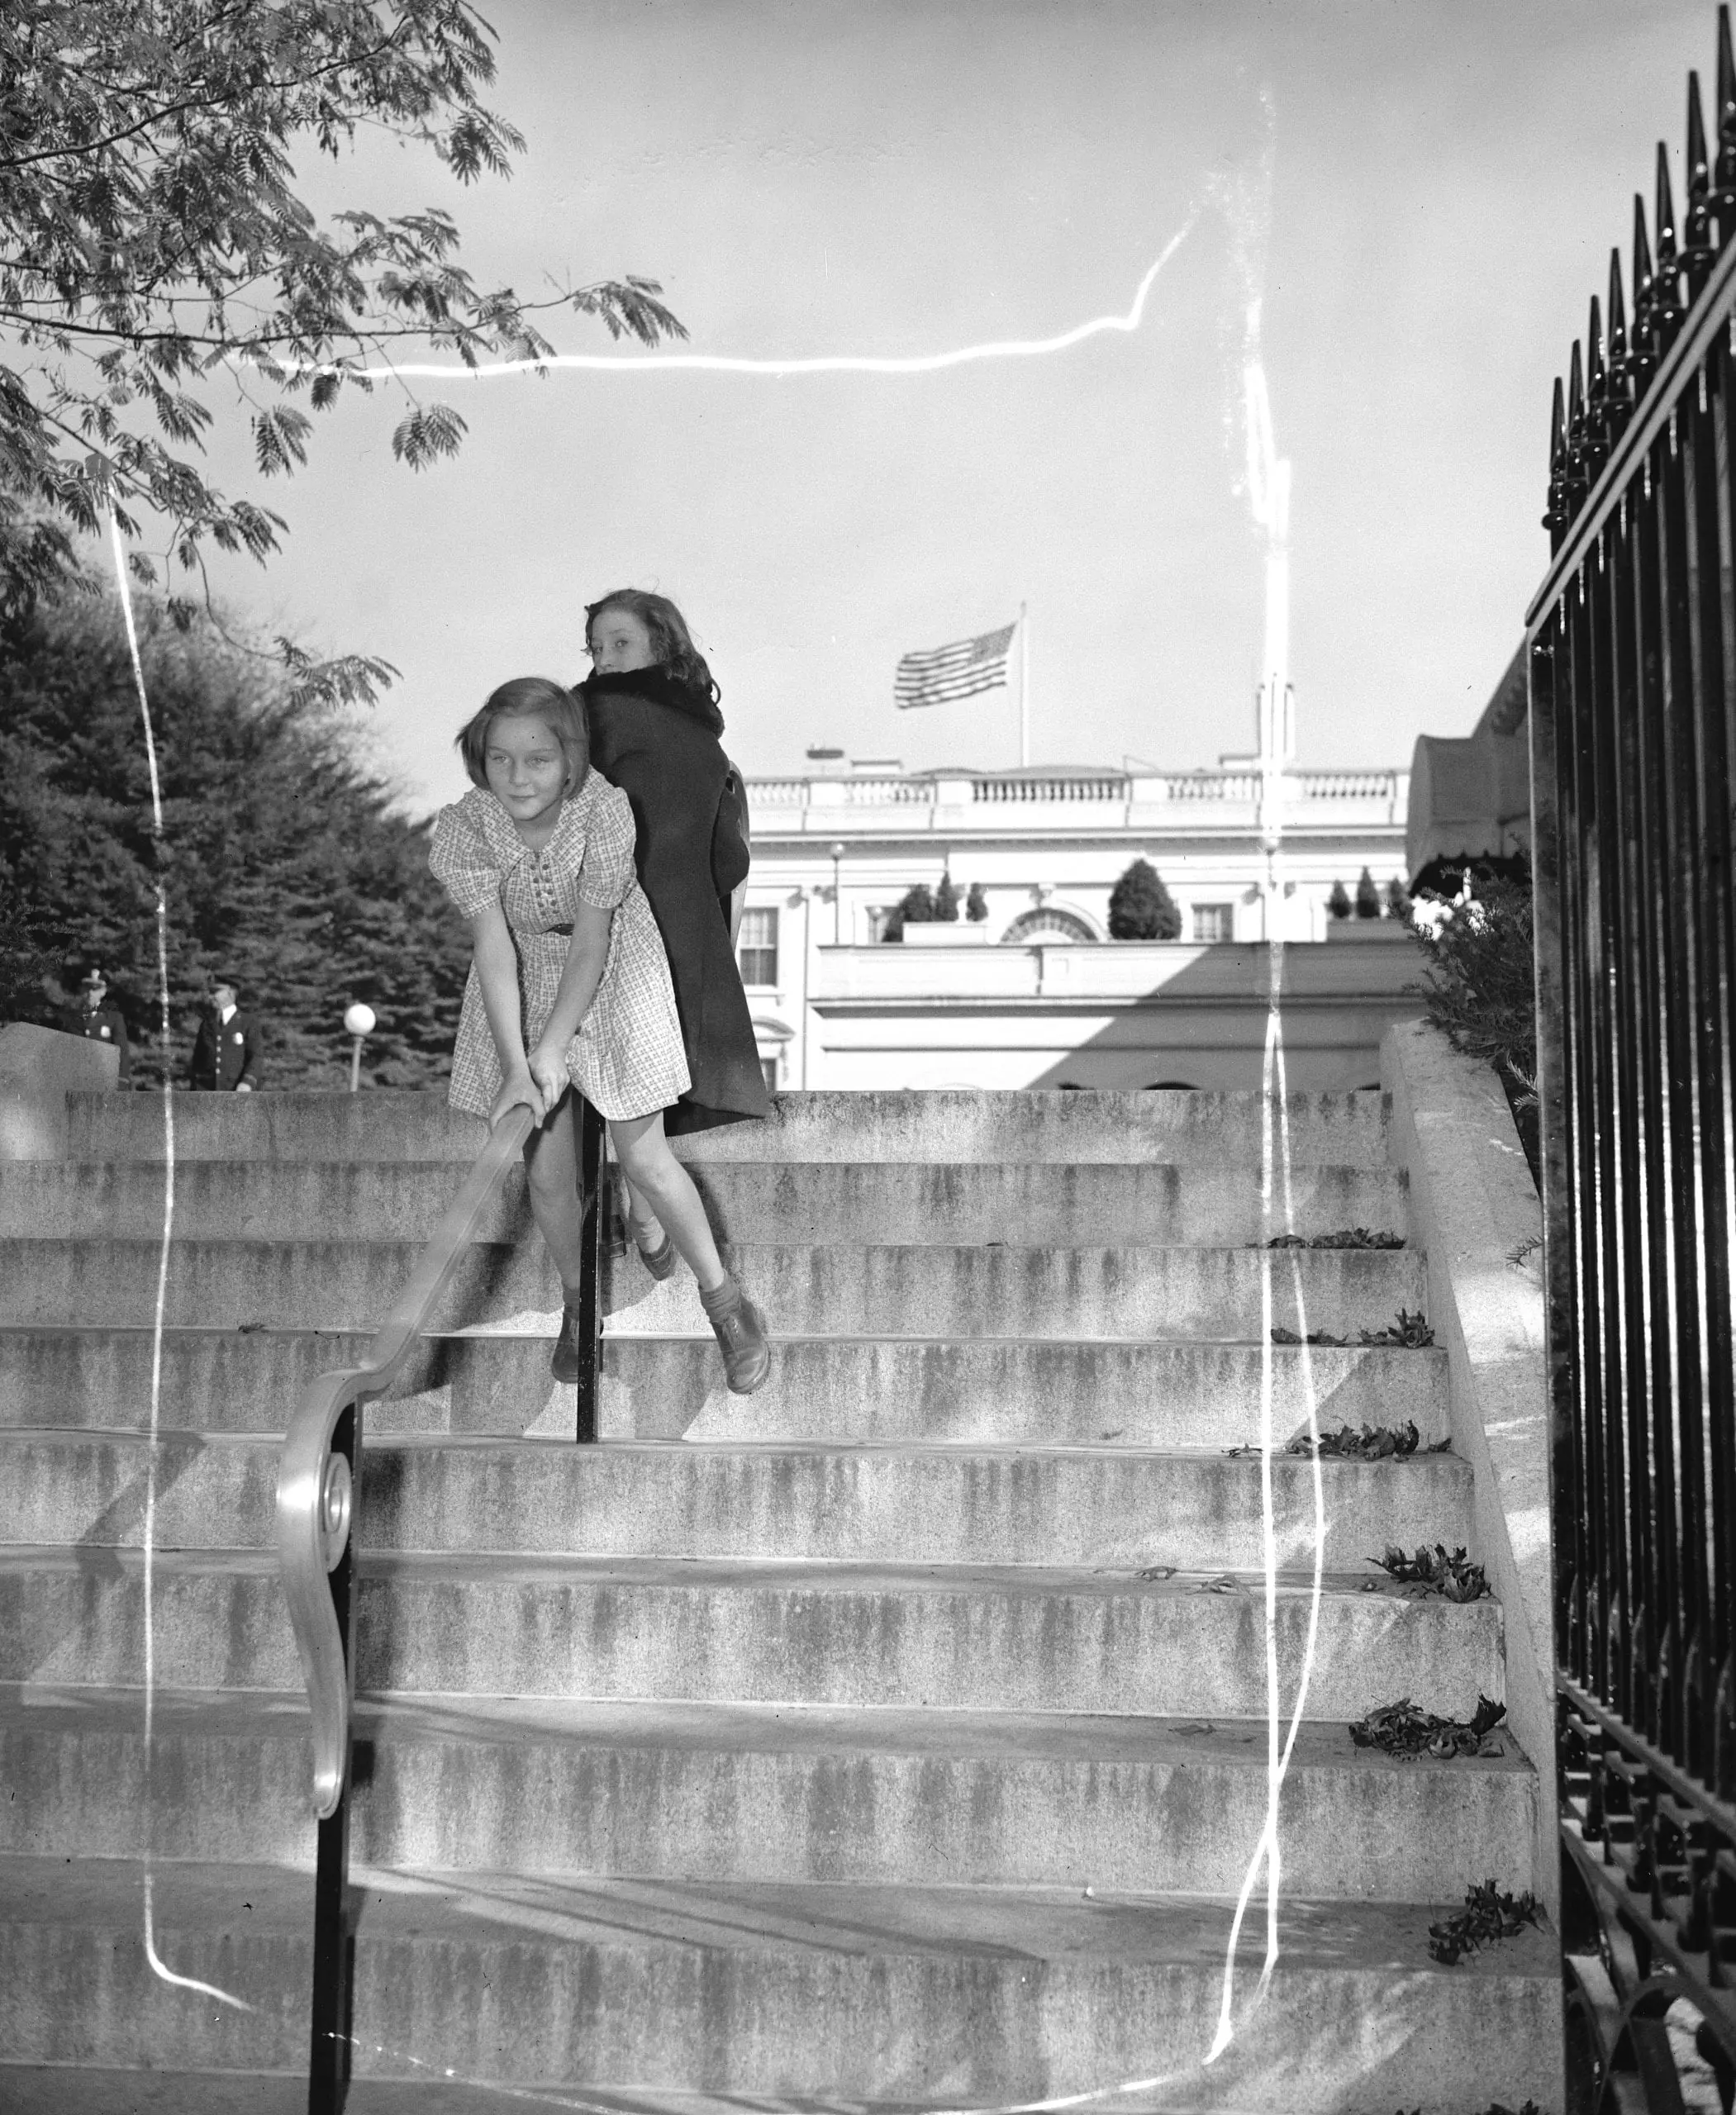 This is a very important picture. Washington, D.C., Oct. 27. A photographer was covering the White House yesterday, snapping pictures of important men after they had conferred with President Roosevelt on his way back to the laboratory he happened to notice thse two little girls, Patricia Freeman and Frances Gross, having fun sliding on the new railing that leads up to the executive offices. Anything around the White House thats new, makes news, the editor though so too and also an very important one becuse there are very few other Capitol cities on this troubled globe where it would catch a photorgapher's eye, Imagine Berlin, or Rome. Imagine even Buckingham Palace, imagine the palaces of rulers the world around, and then try to imagine two little girls having fun sliding on a railing. SS Troopers in Berlin, Grenadiers at Buckingham--verboten-you can't do this you know, vigorous shooing away from the Plazzo Venesia in Rome. But here the little girls slide down the railing an it doesn't seem to affect the affairs and progress of government and as long as the little girls can keep on at their fun, our president and our government are safer for us than if all the SS troopers in the world stood by to make it so, 10-27-38